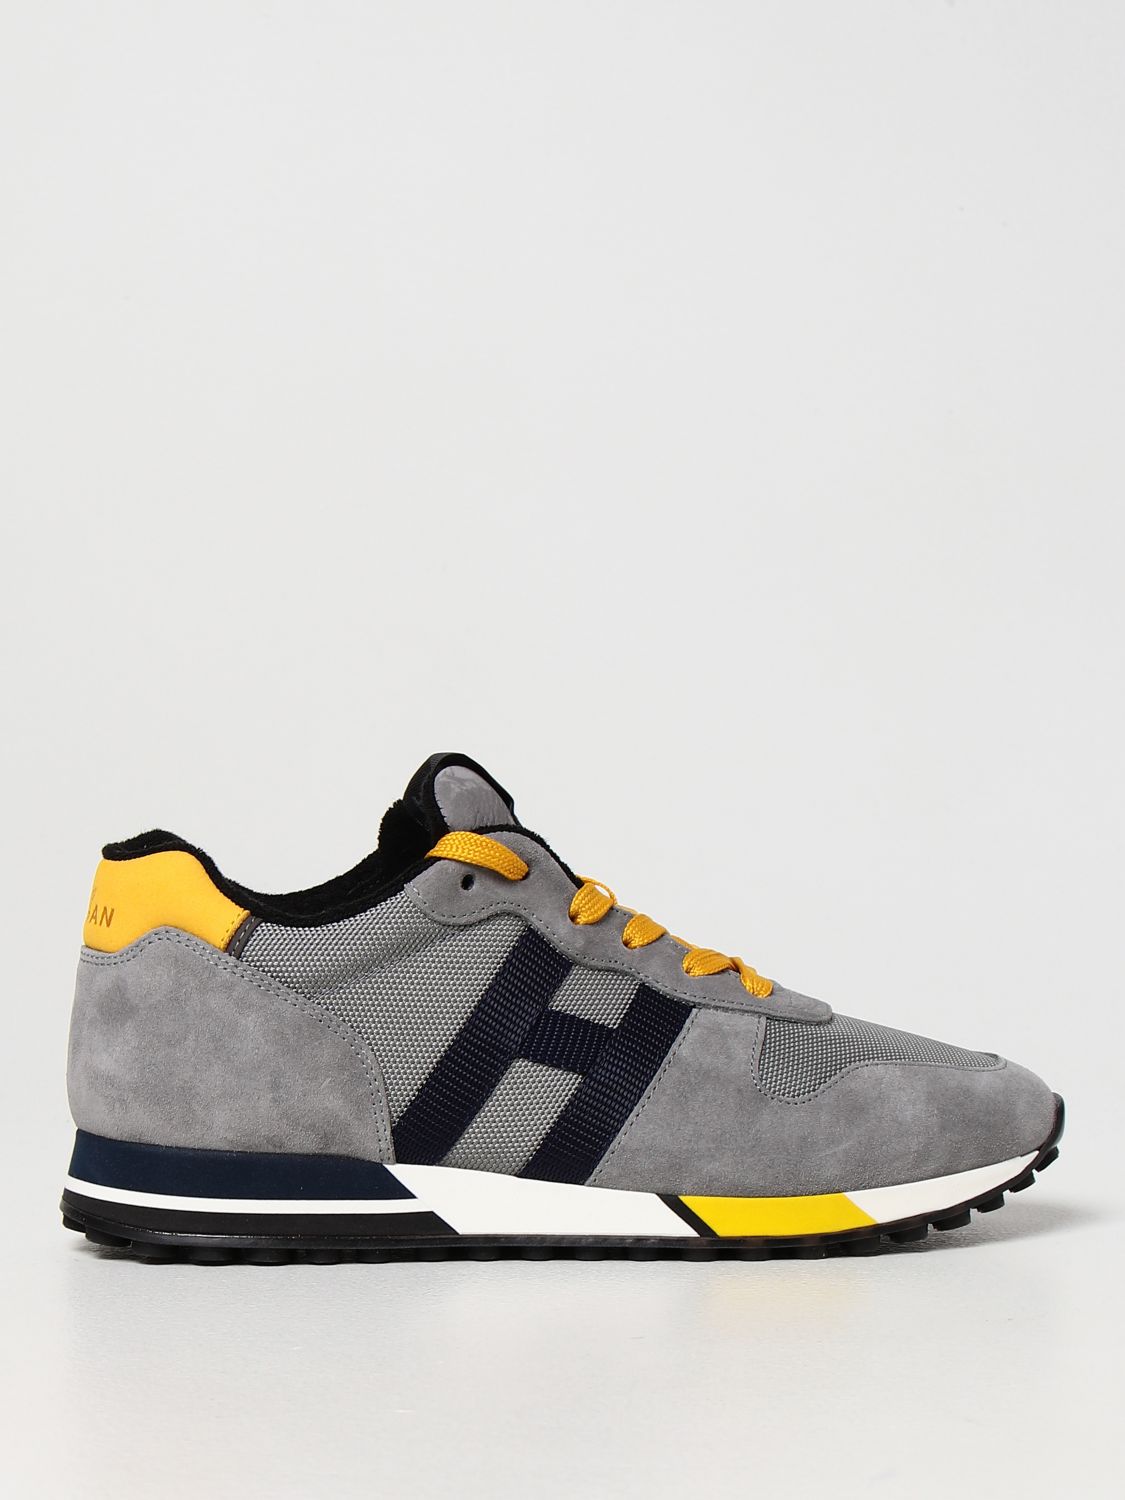 HOGAN H383 RUNNING HOGAN SNEAKERS IN FABRIC AND SUEDE,357633020